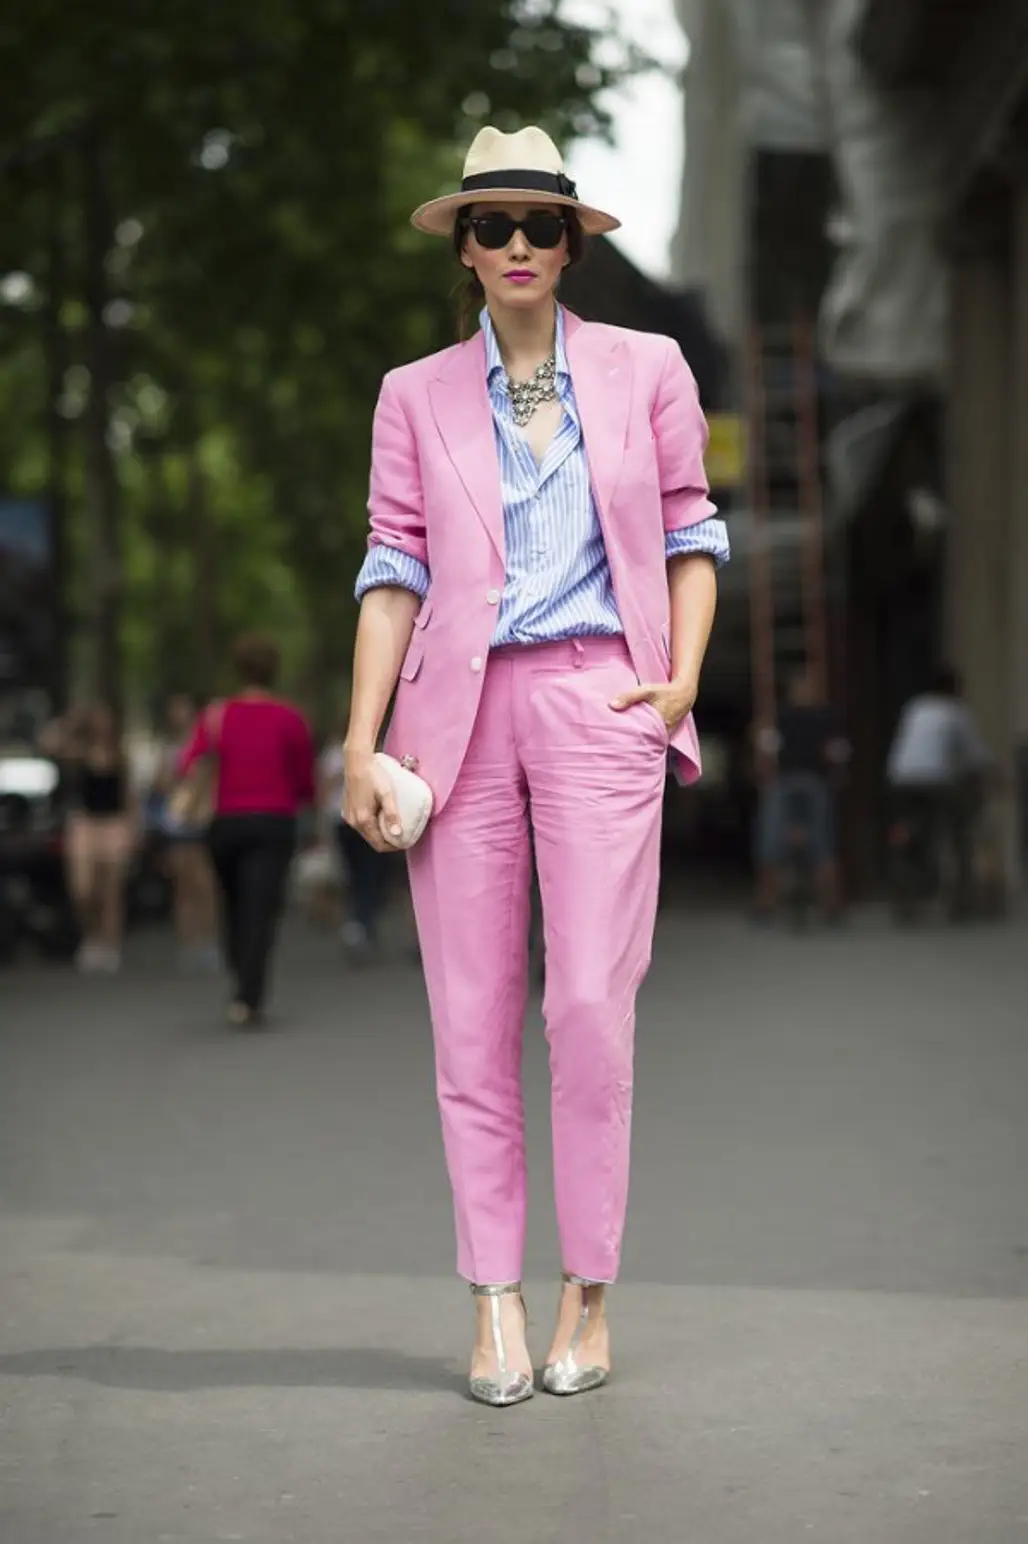 Top Your Summer Tops with a Cute Suit for the Office